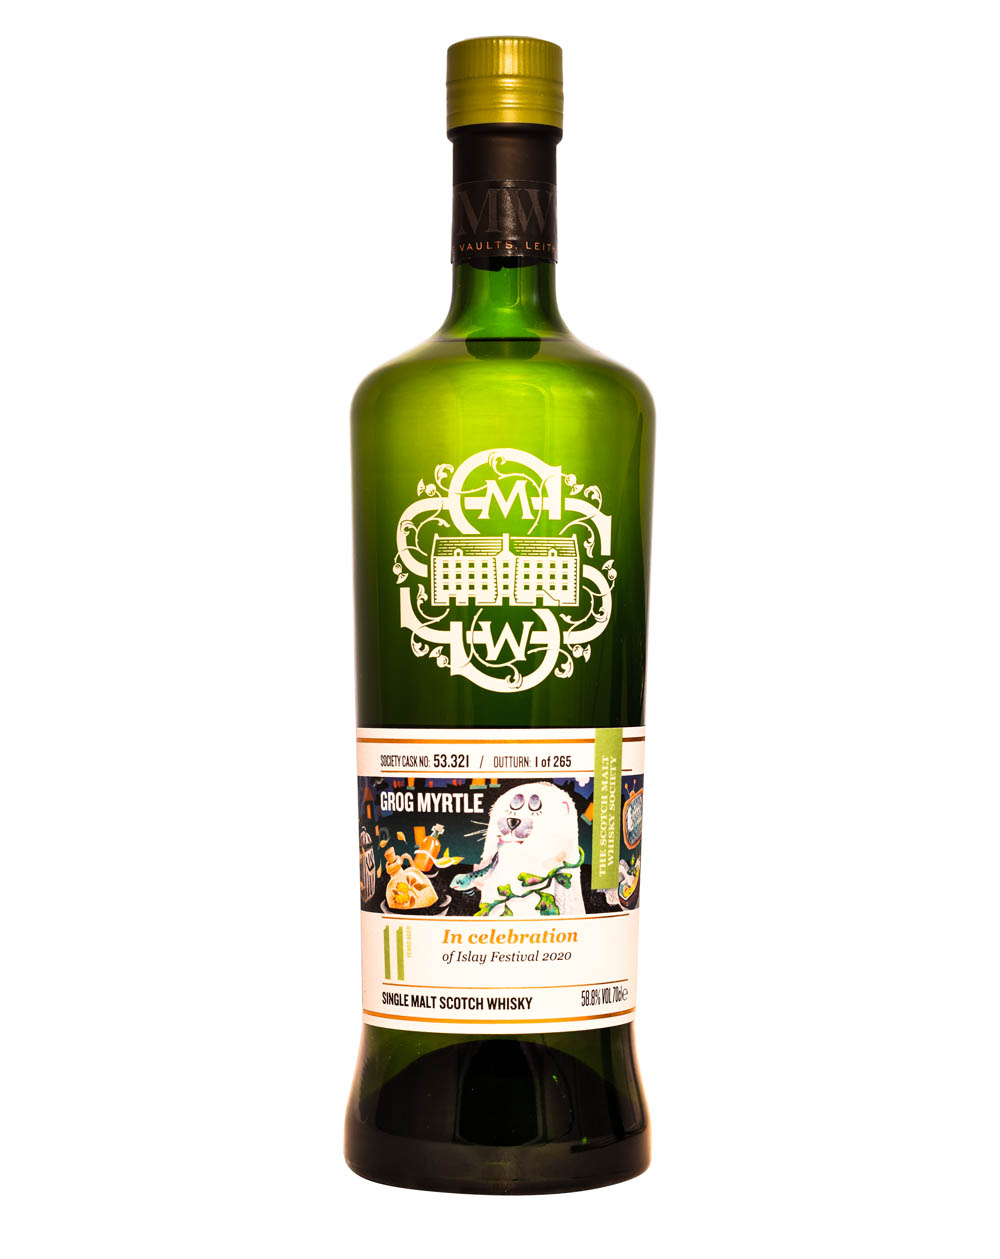 Caol Ila 2008 SMWS Grog Myrtle 2020 Islay Festival (11 Years Old) Musthave Malts MHM